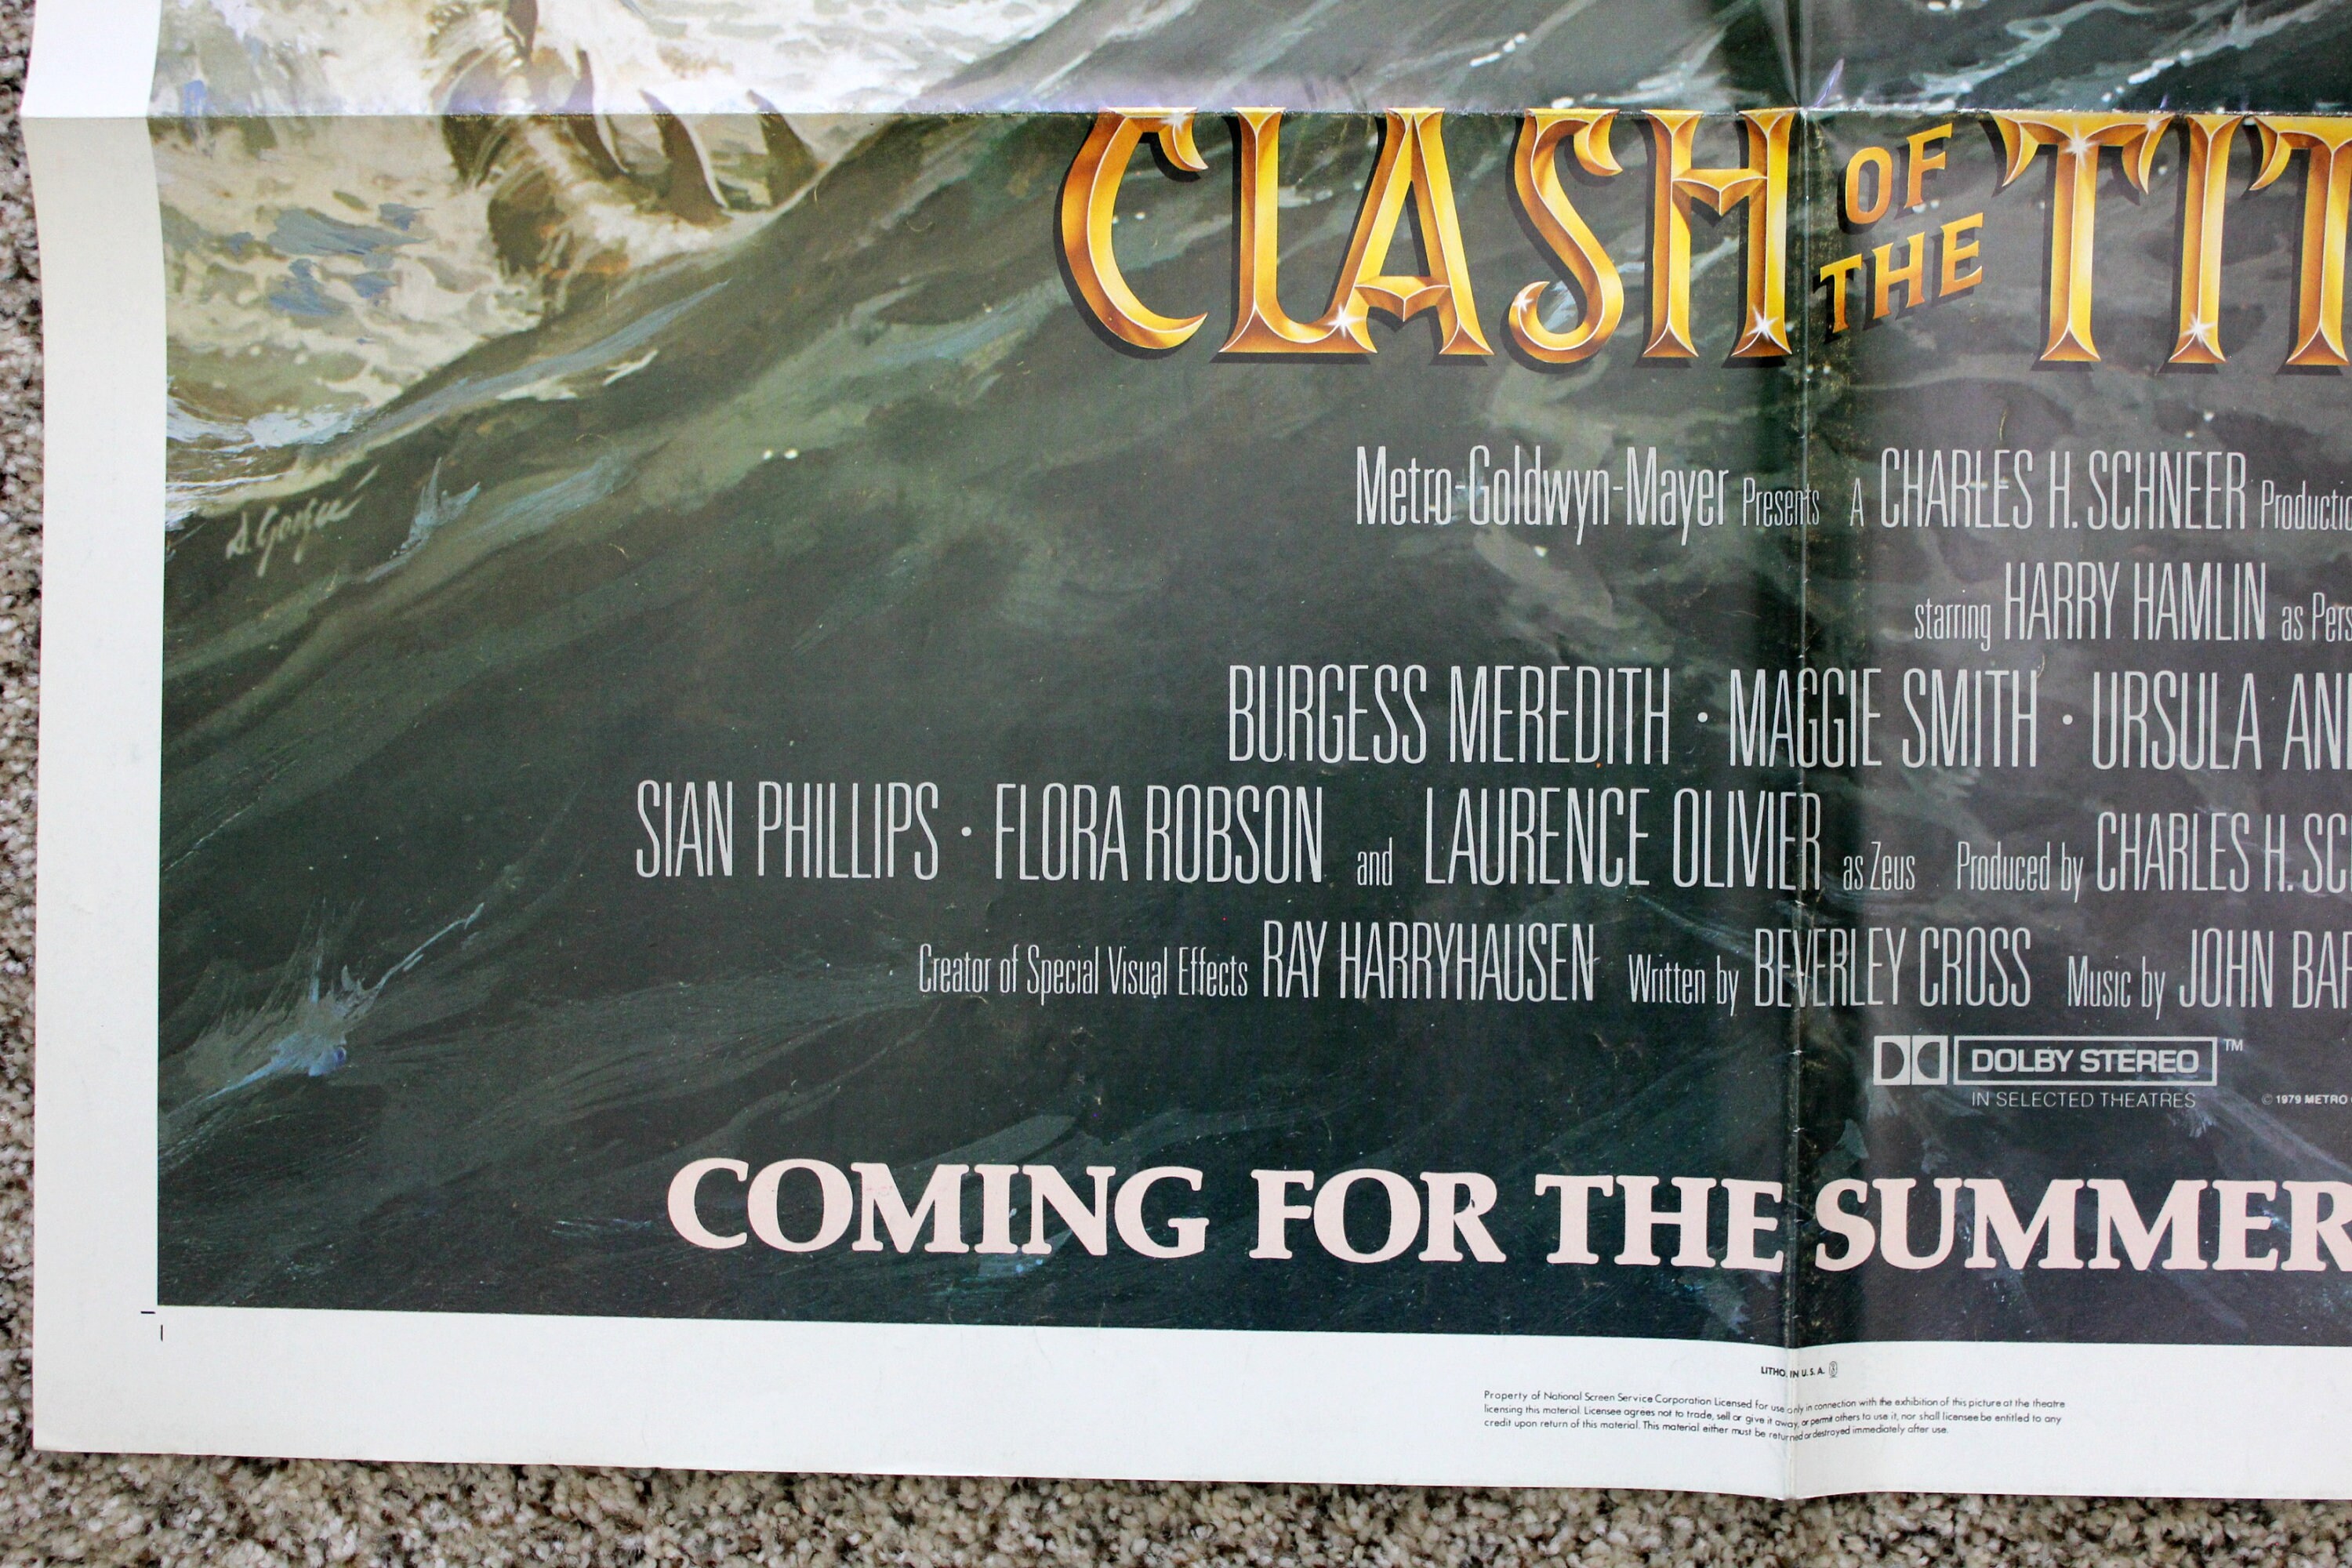 Vintage Clash of The Titans Movie Poster, Original Advance One Sheet 27 x 41